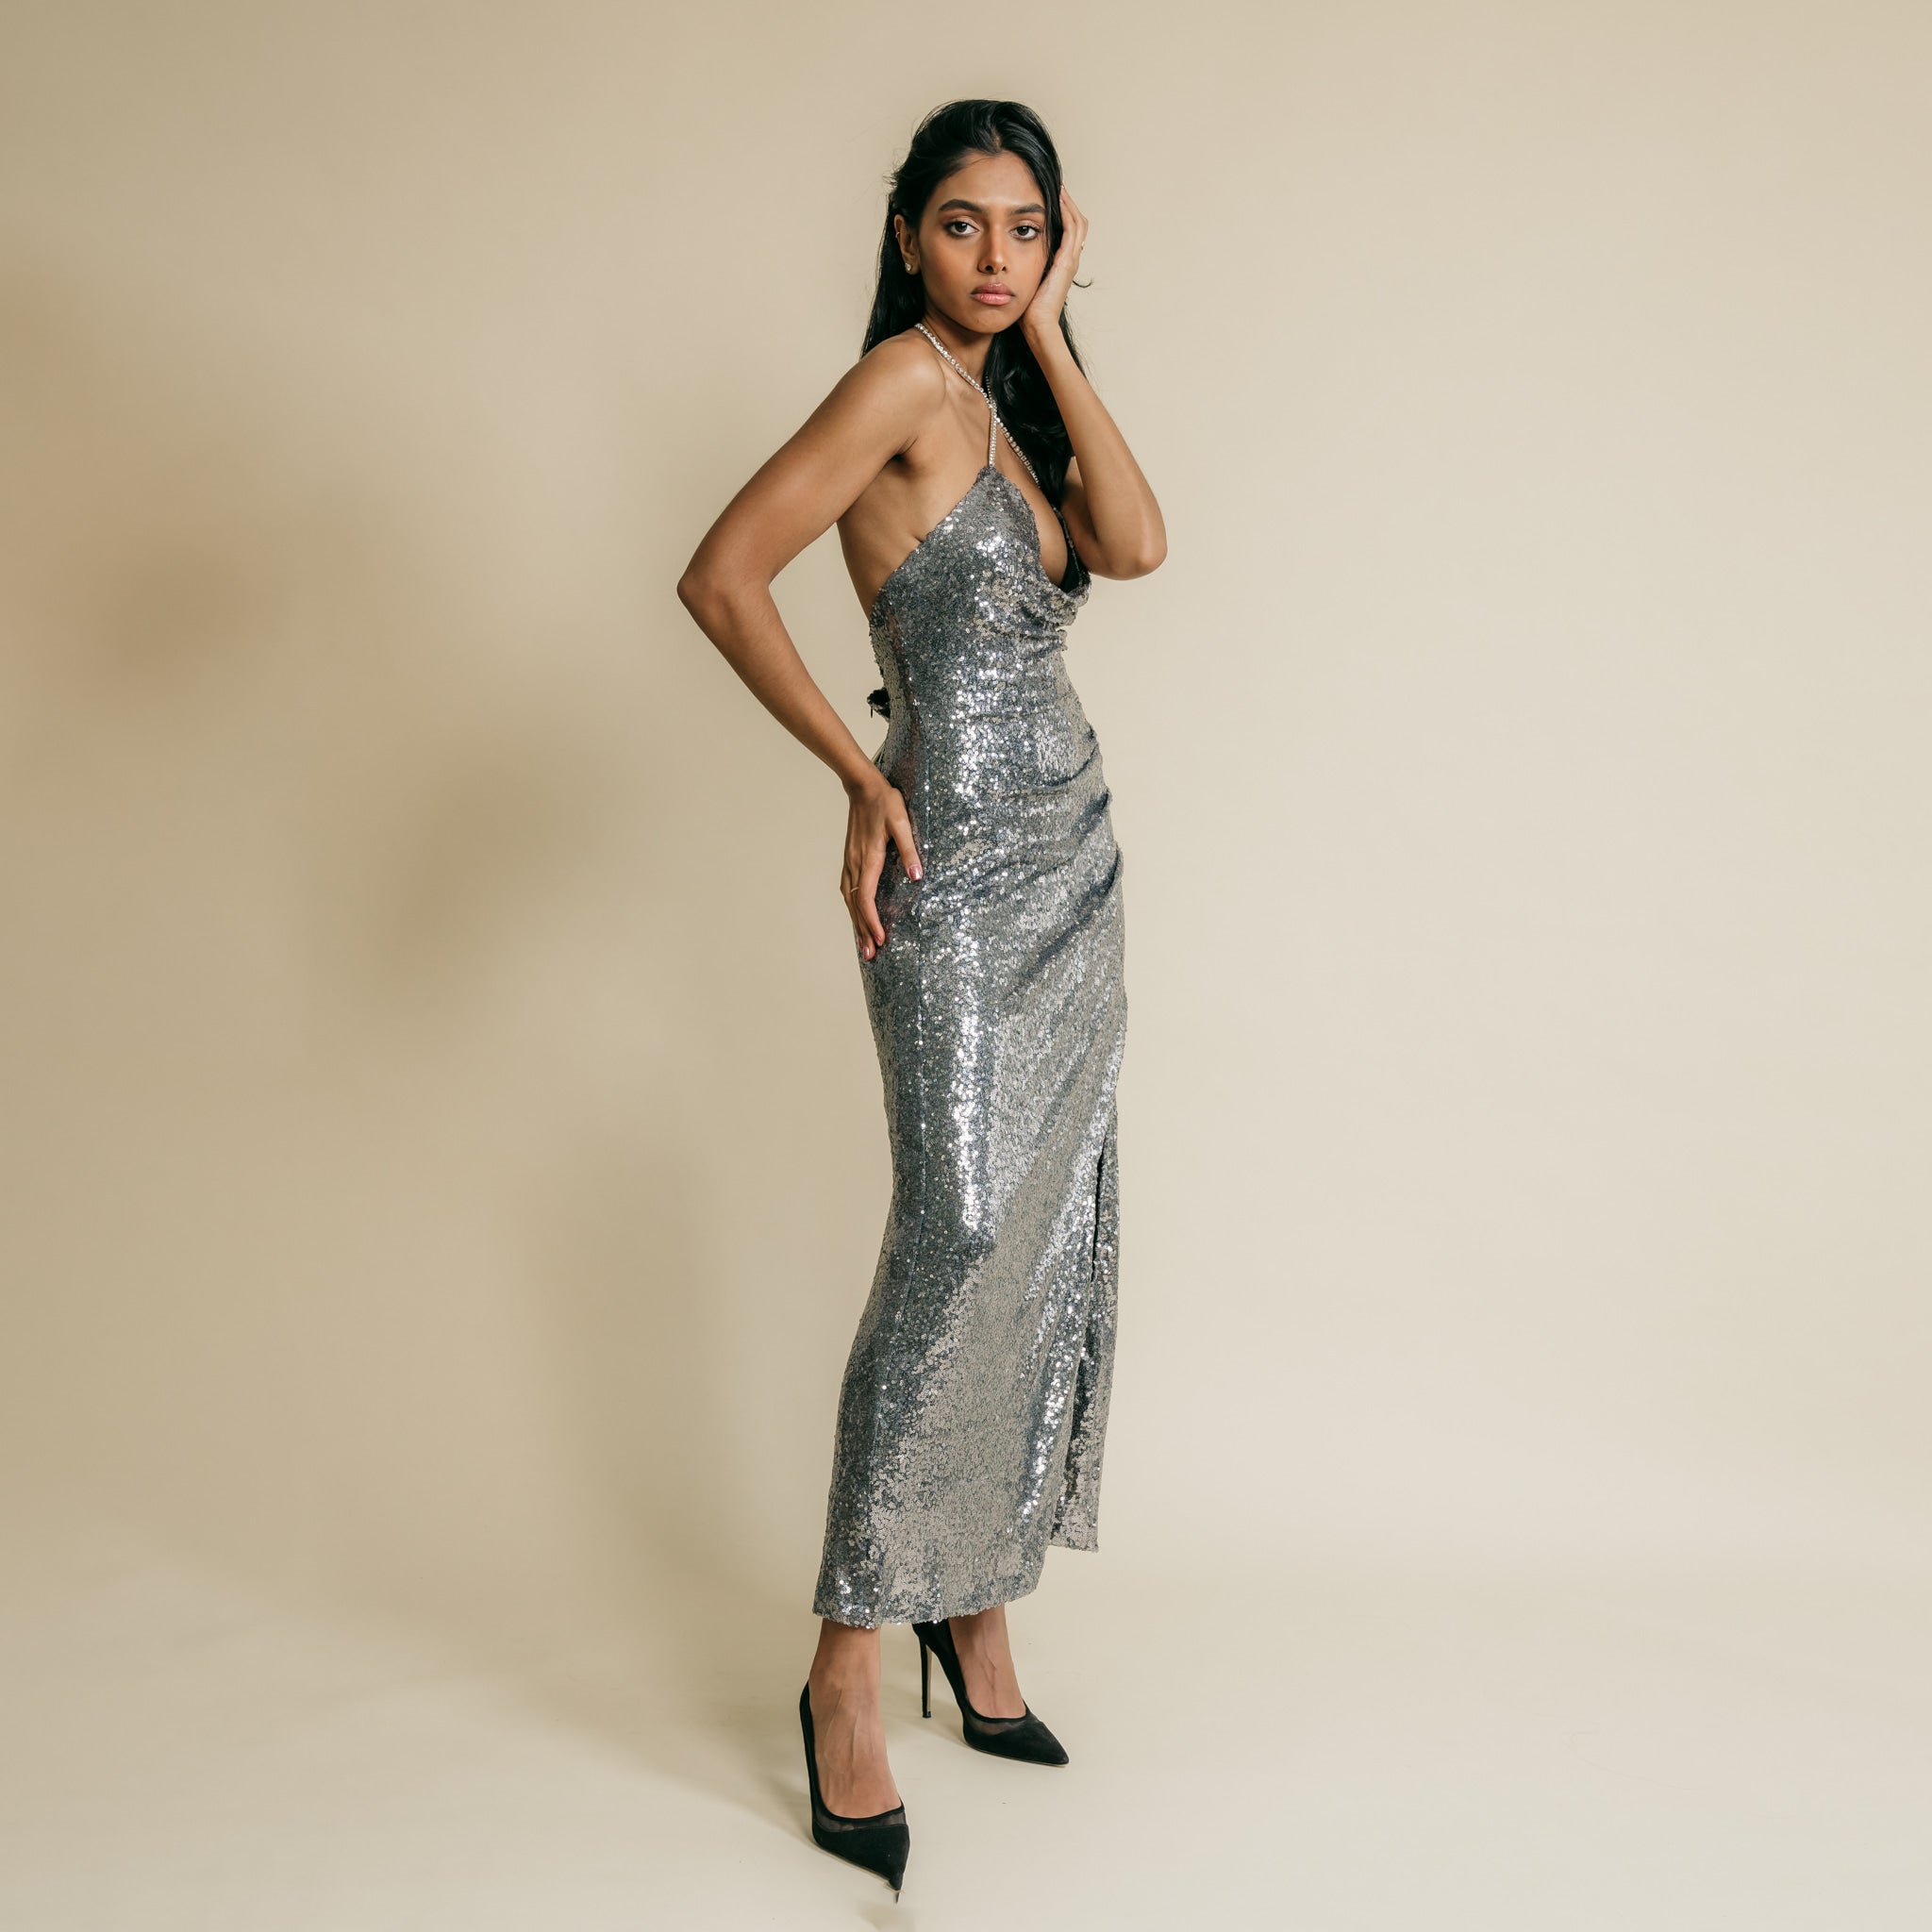 Shiny, grey color, sequin, long dress has on front cross over, rhinestone straps details.